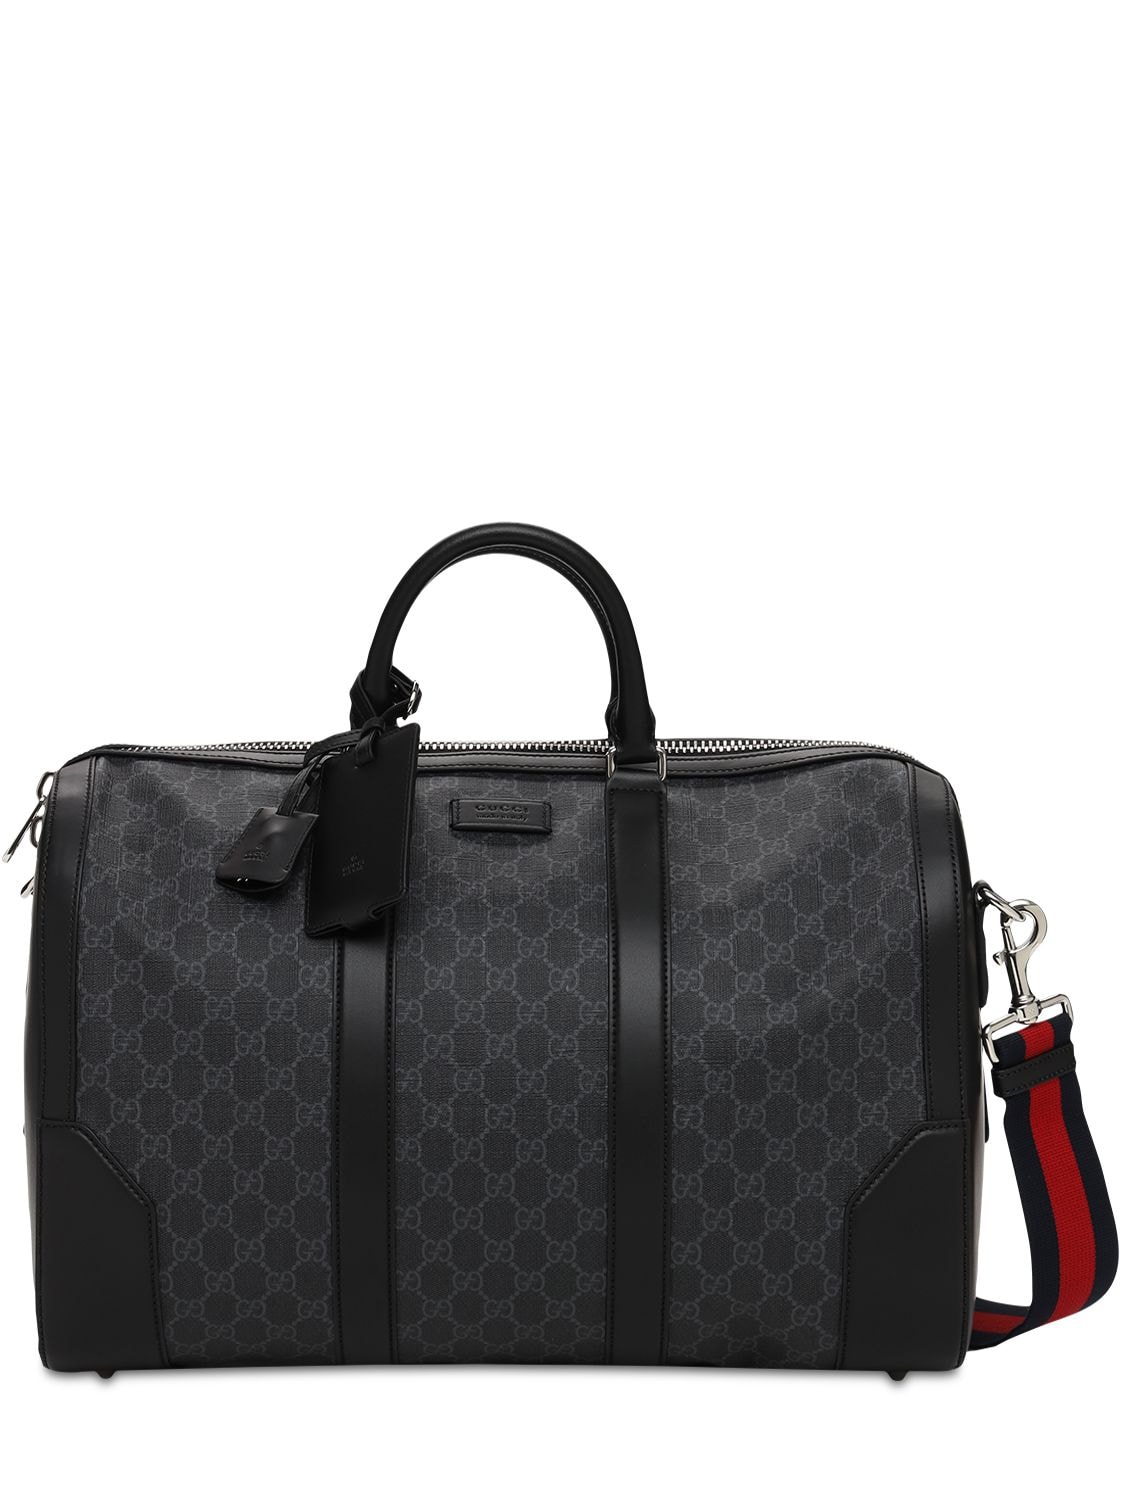 Image of Gg Carry-on Duffle Bag